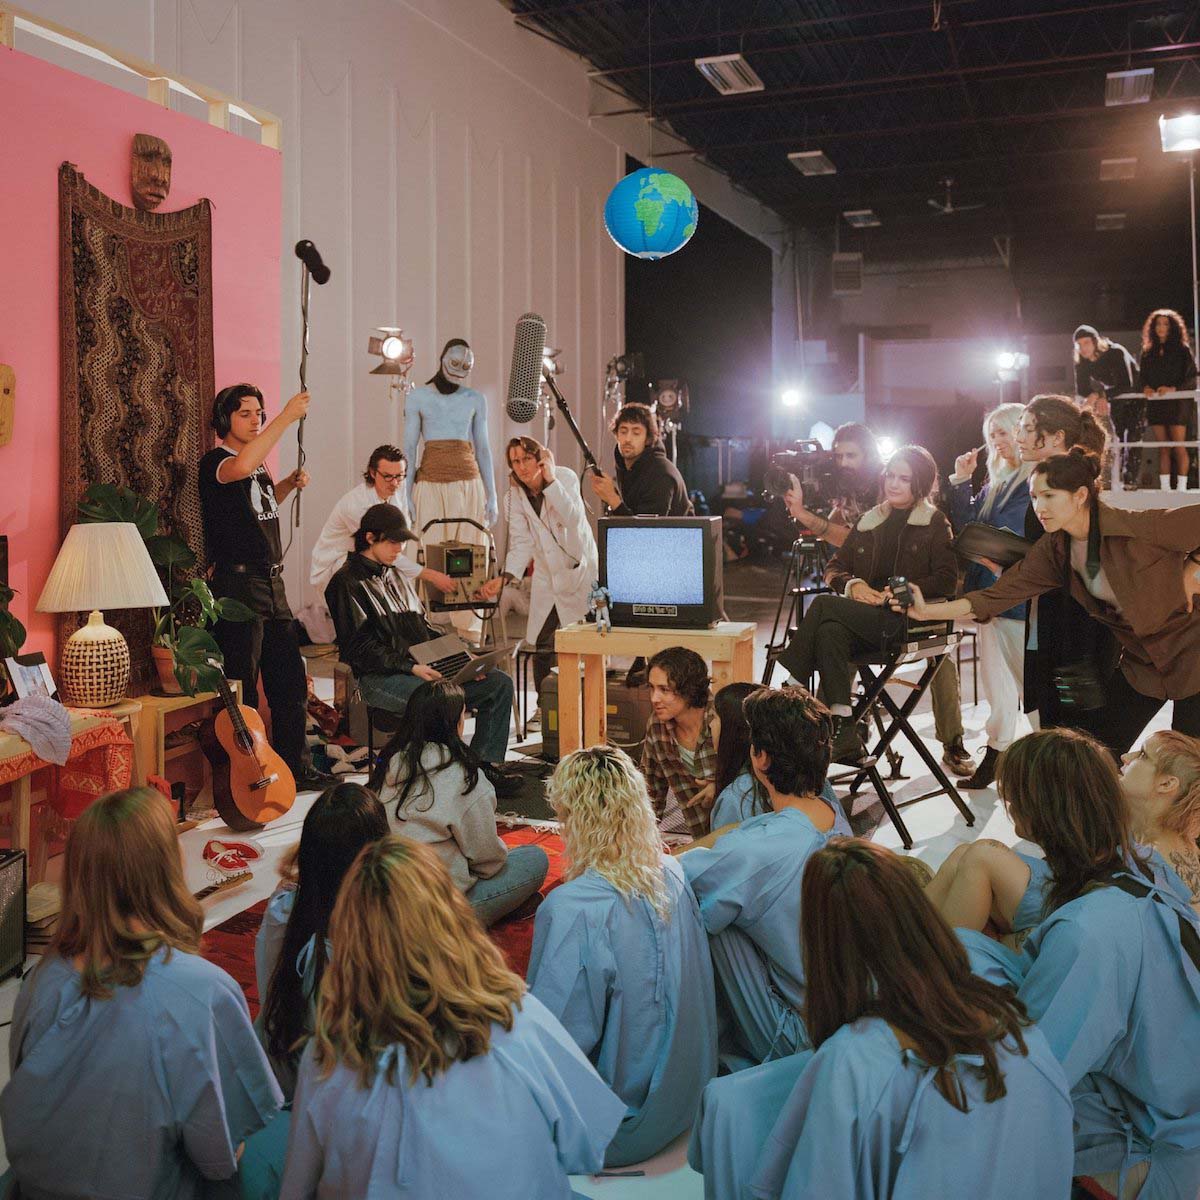 Scene with numerous people in a youth room with lamp, tapestry, TV, guitars that has been set up in a corner of a large film studio. The aesthetics of the image can also be found in the Crack Cloud video for "Please Yourself". In the foreground, a group of people in blue patient gowns sit on the floor. They can all be seen from behind watching two people in everyday clothes, also sitting on the floor talking, with a camera pointed at them. In the background is a film crew consisting of, among others, the director on the director's chair, people for camera, sound and lighting. As well as two other people in white coats and one with a monster mask.